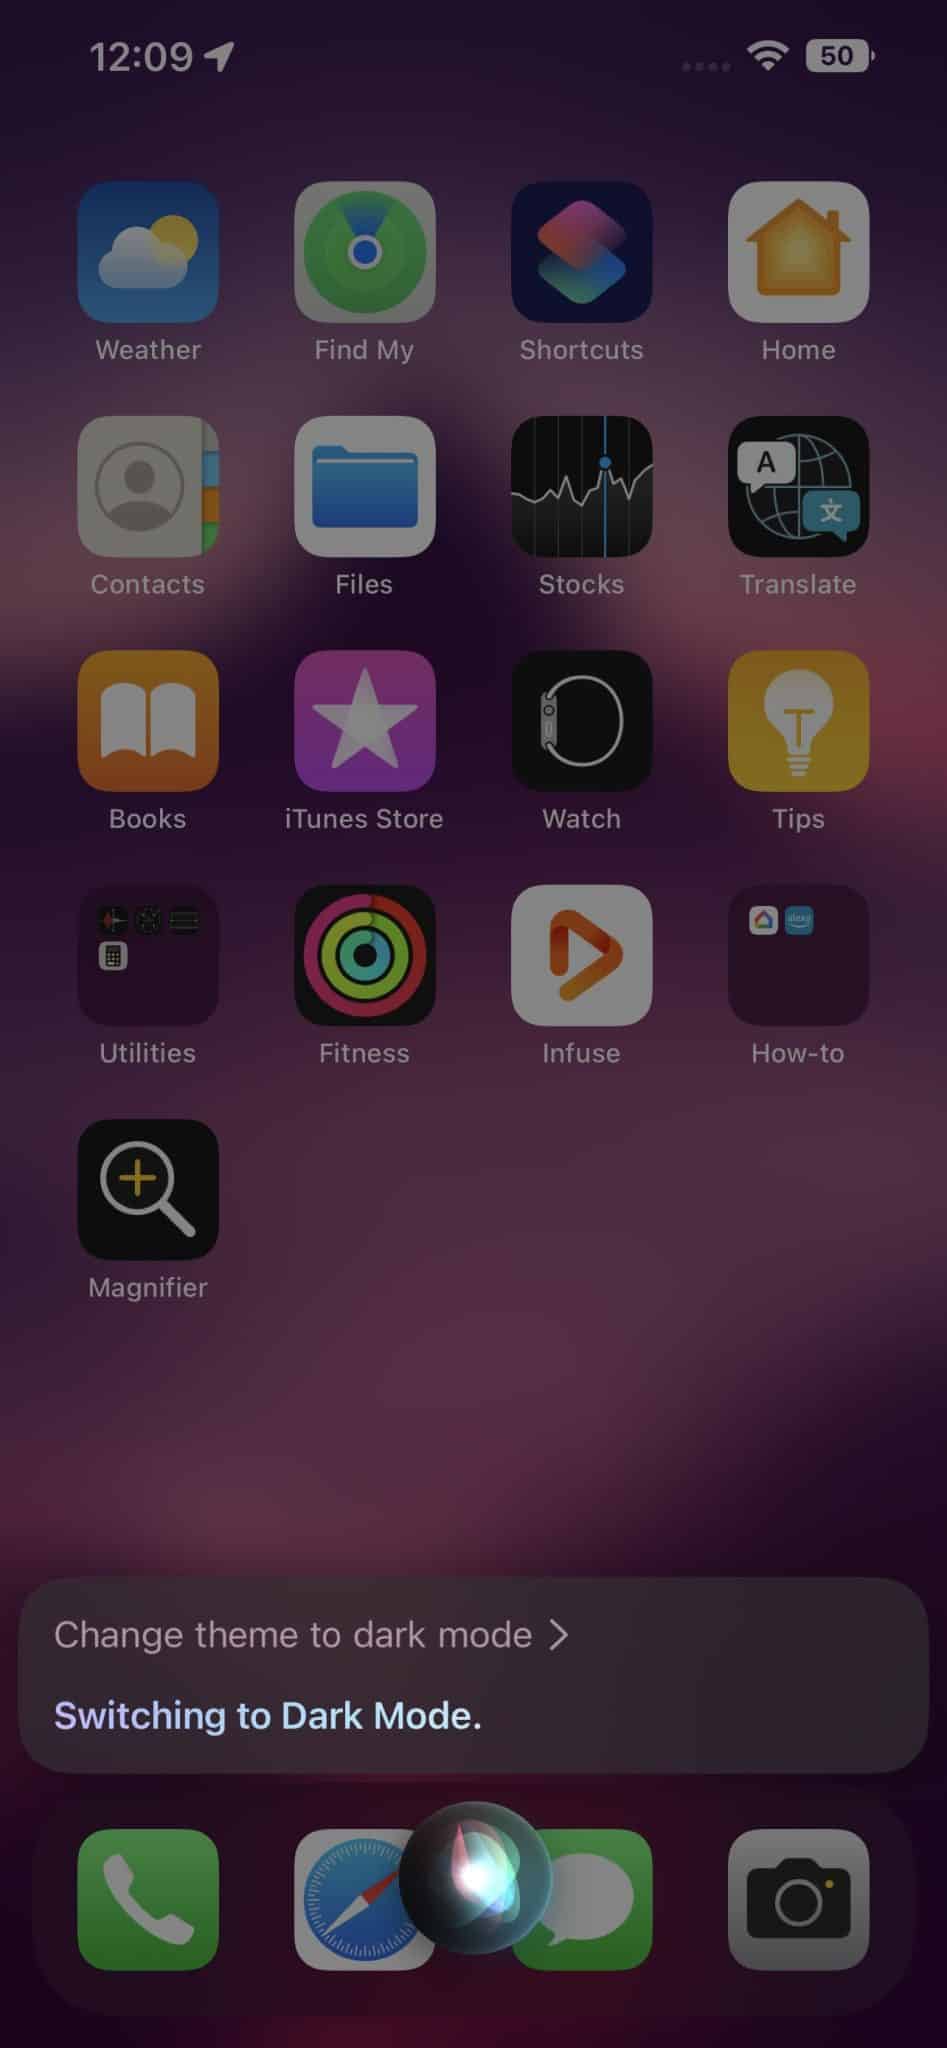 Switching to Dark Mode on an IPhone using Siri offline commands